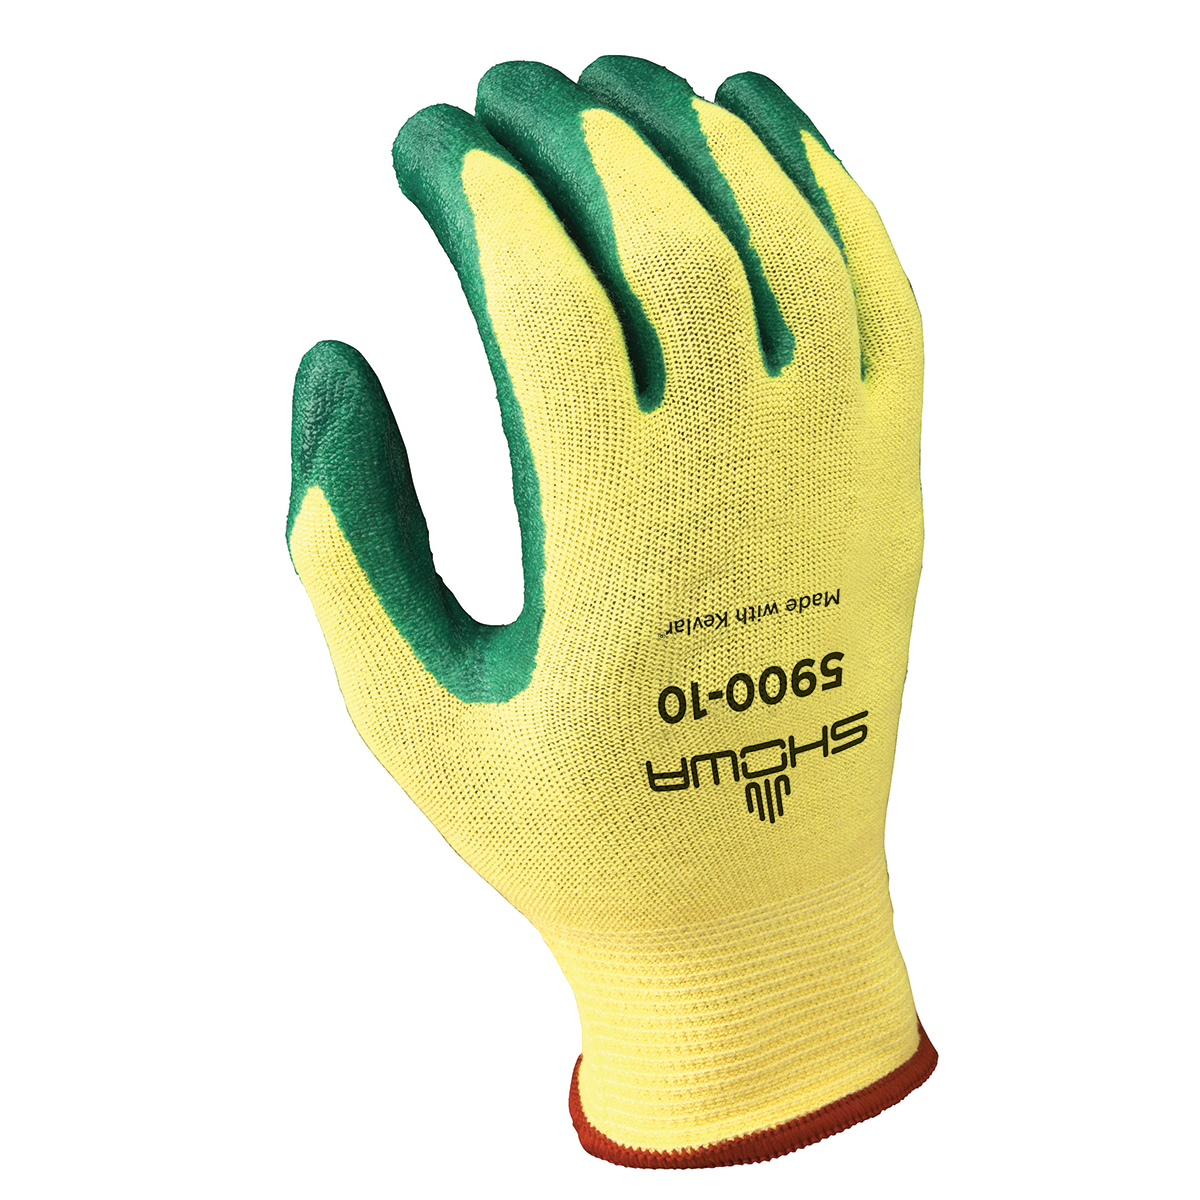 Cut resistant, nitrile-coated flat-dipped, yellow/green dip, seamless, cut-resistant, Kevlar®-Lycra® shell, large ANSI CUT LEVEL A3